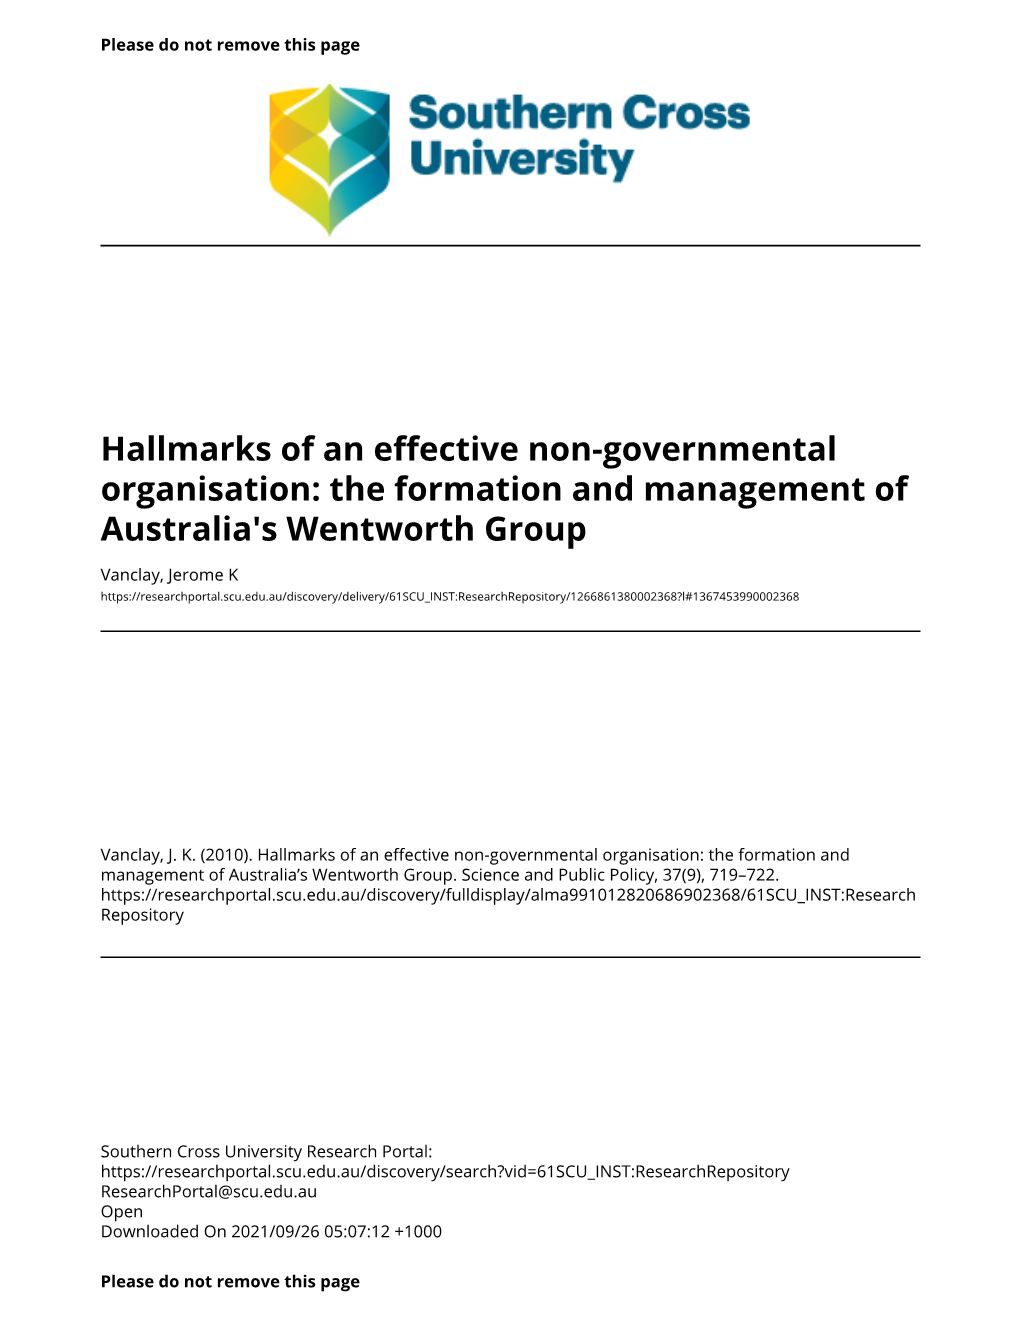 Hallmarks of an Effective Non-Governmental Organisation: the Formation and Management of Australia's Wentworth Group